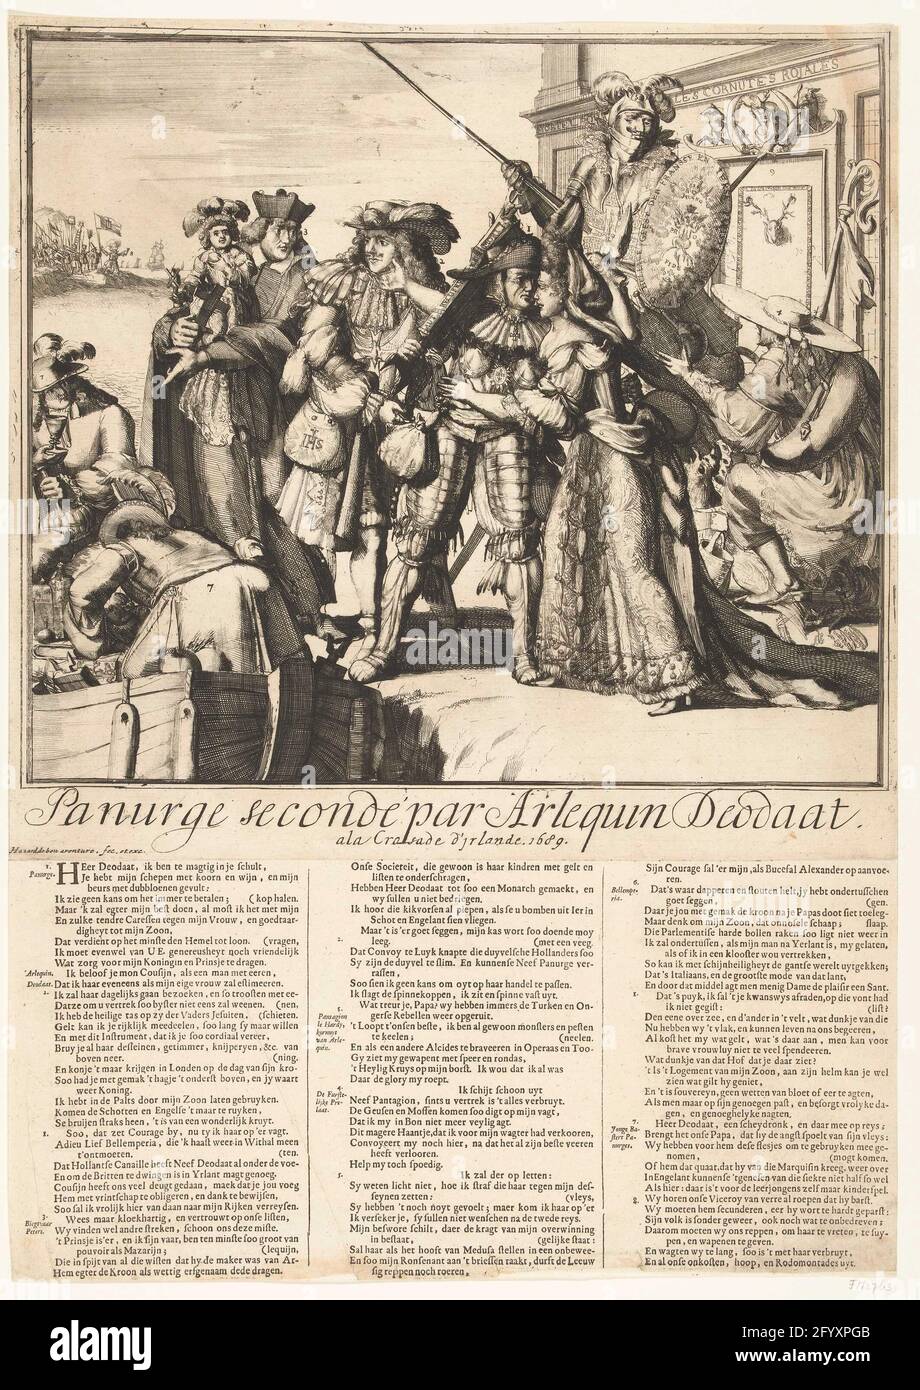 Cartoon on the departure of Jacobus II to Ireland, 1689; Panurge Secondé PAR ALQUIN DEODAT ALA CROSADE D'Irlande. 1689; Cartoon on Jacobus II and Louis XIV and the events in the years 1688-1689. Cartoon on the departure from Jacobus II to Ireland, March 1689. Jacobus says goodbye to his wife Maria van Modena who is then Louis XIV loves. The French king gives James a bag of money, left Father Peters (Edward Petre) with the polar child on the arm. On the right, the Cardinal and Bishop of Strasbourg complains to the Dauphin that is on a donkey. A boat is prepared for departure. Under the show a v Stock Photo